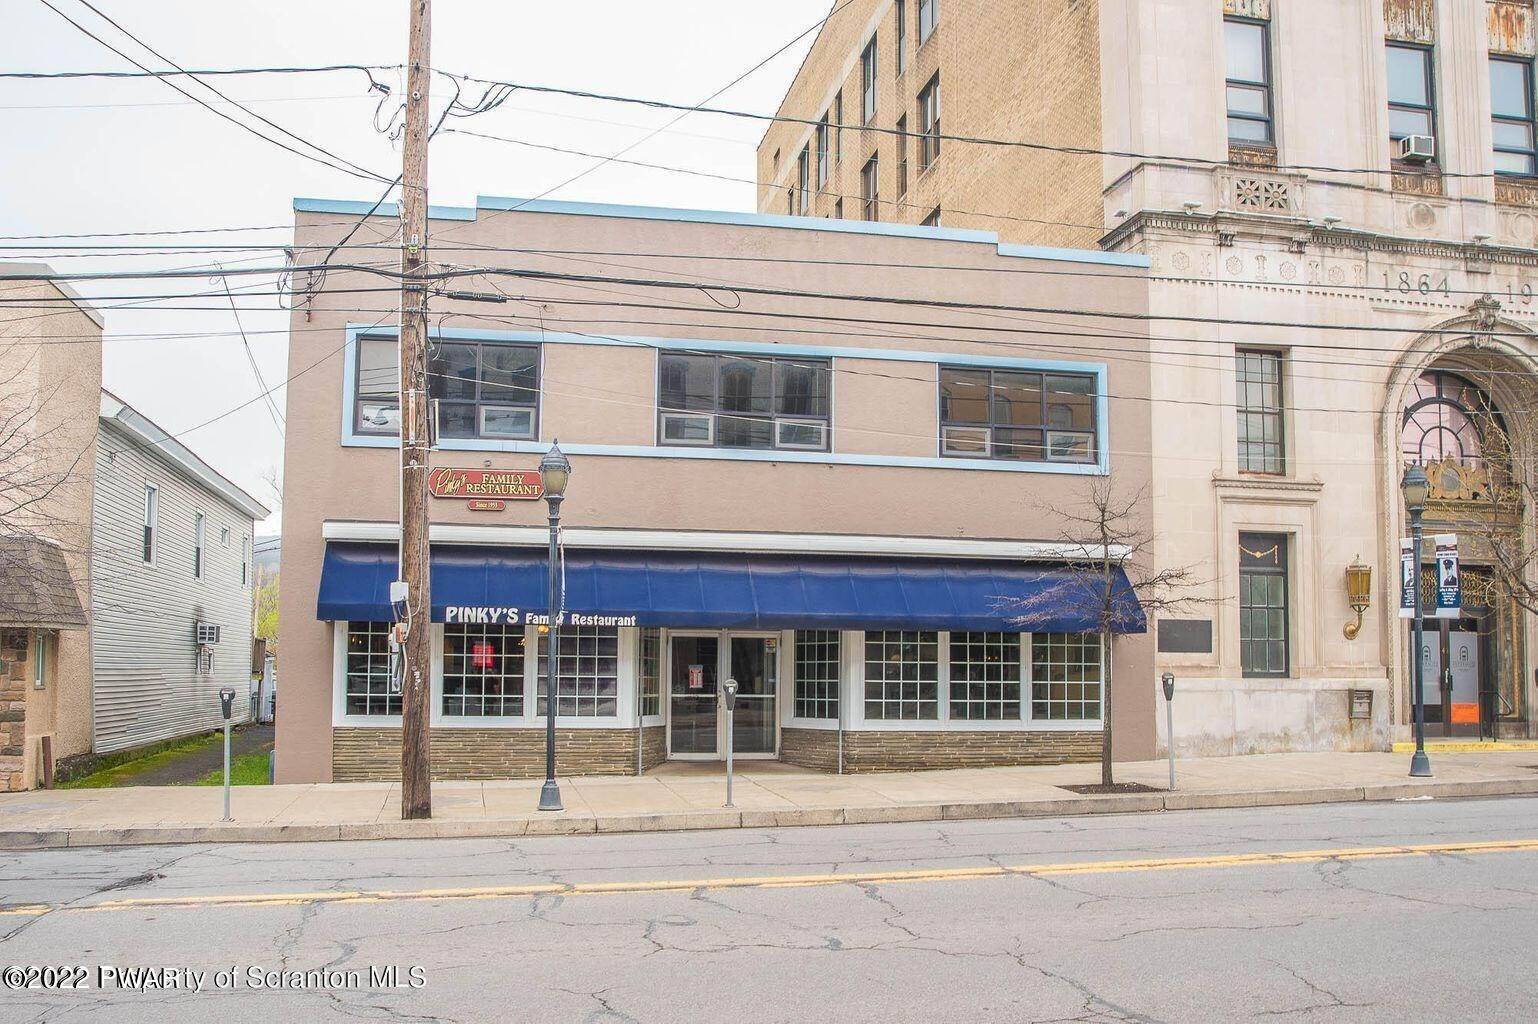 Property for Sale at 37-39 N Main St Carbondale, Pennsylvania 18407 United States